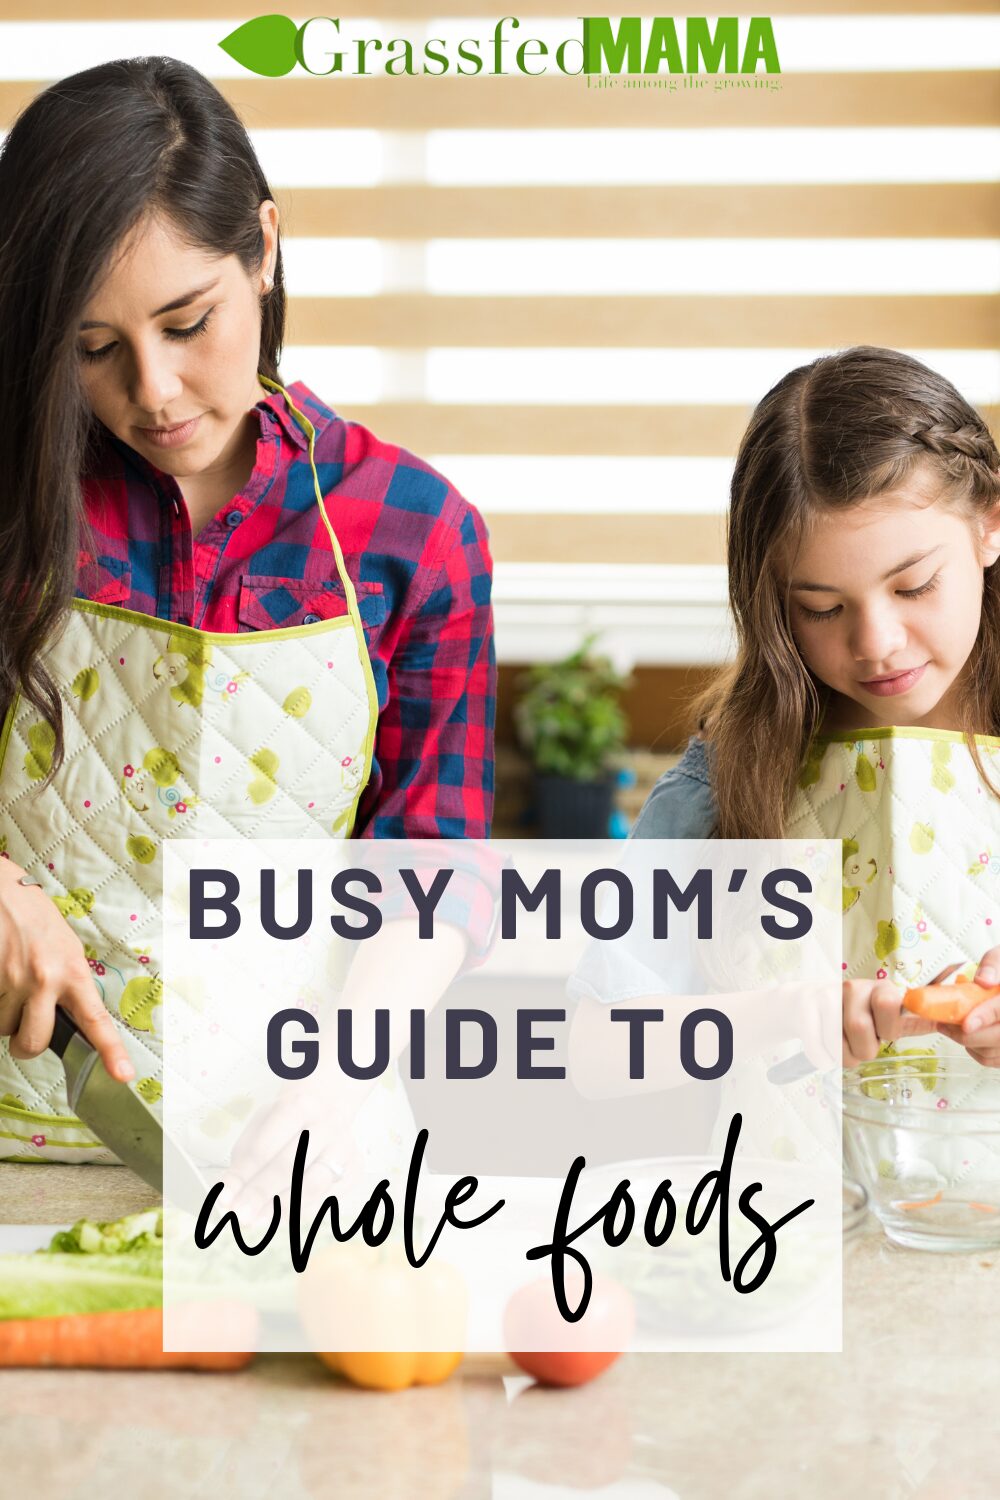 Busy Mom's Guide to Whole Foods